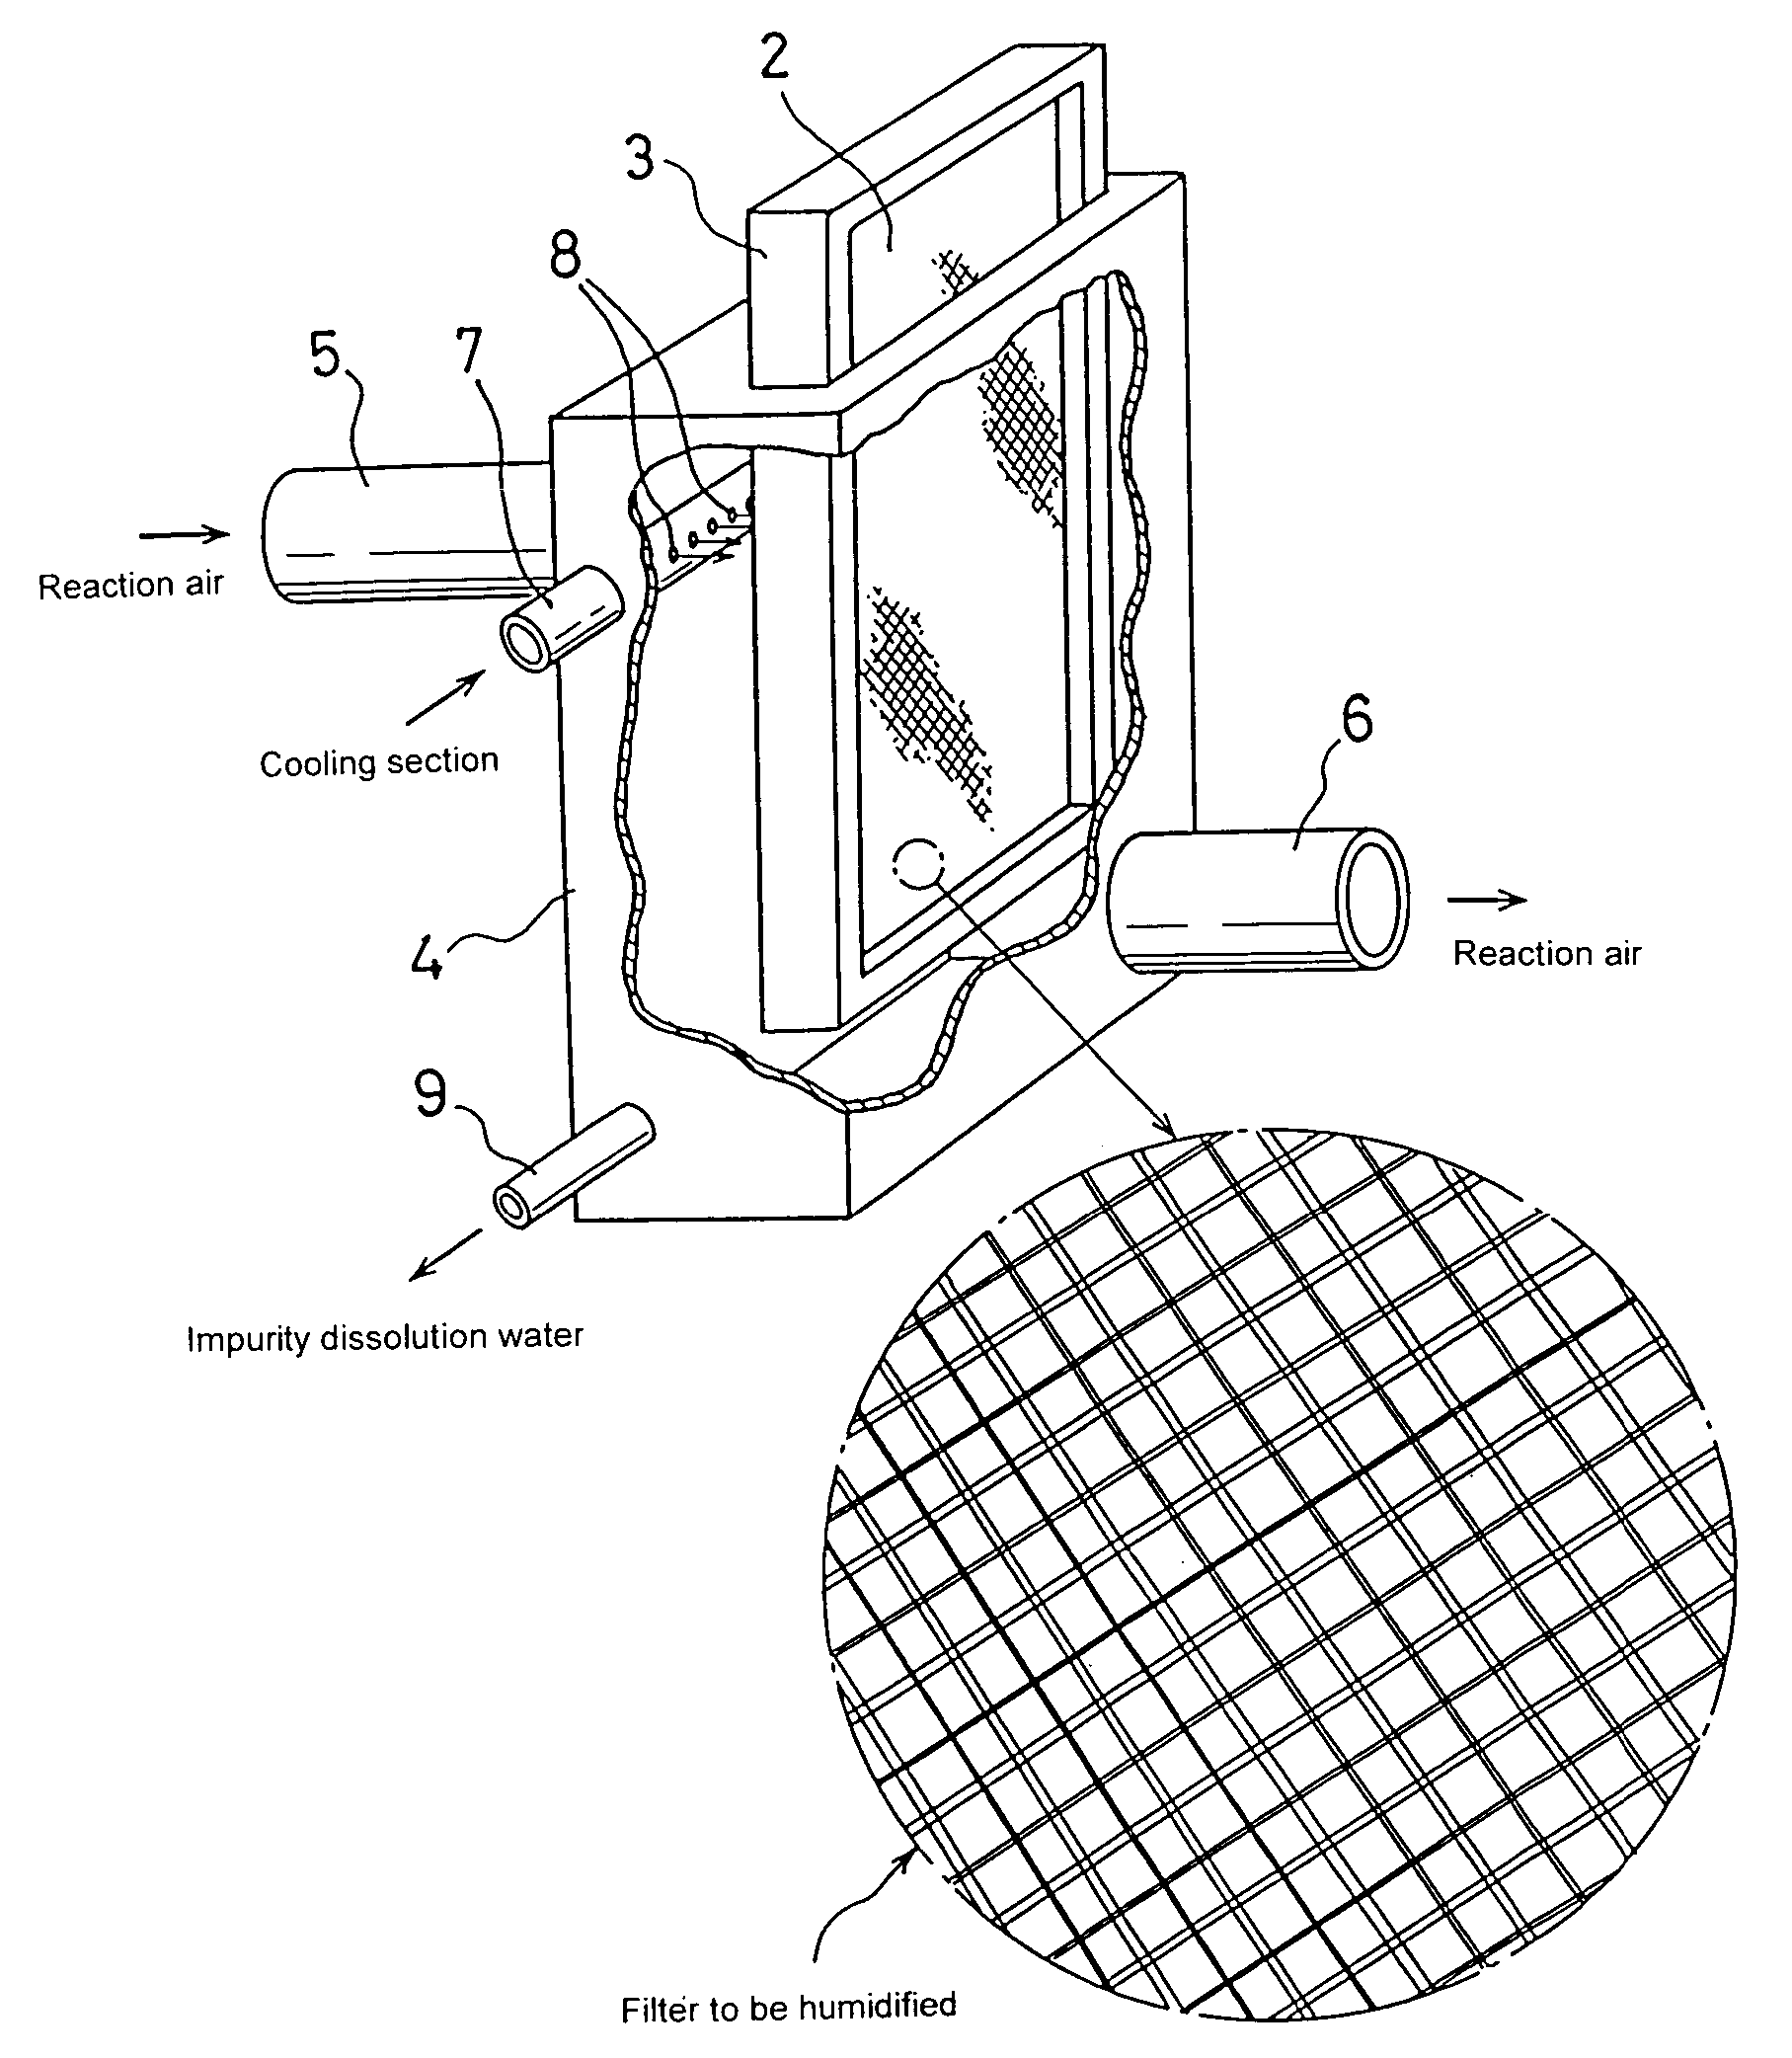 Fuel cell power generating system